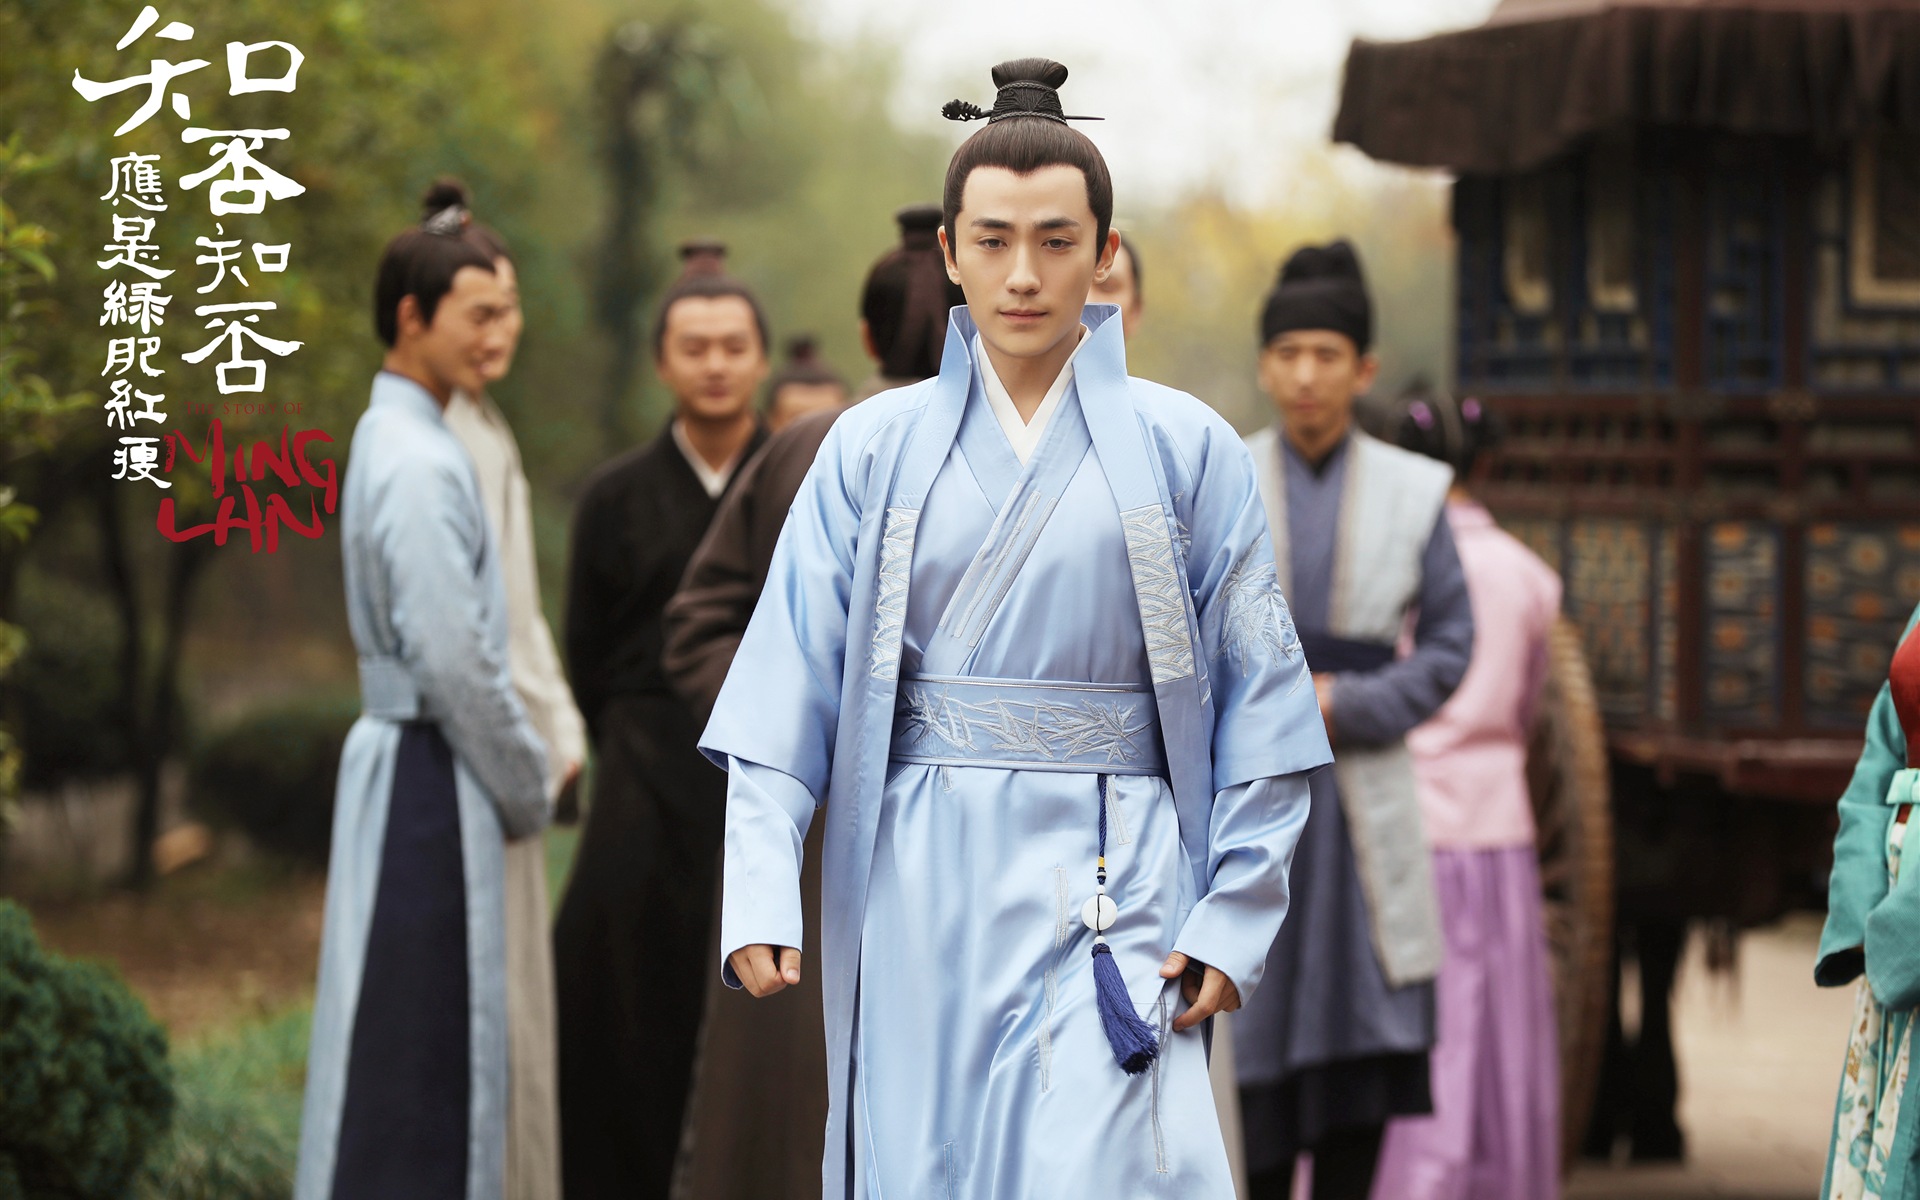 The Story Of MingLan, TV series HD wallpapers #54 - 1920x1200